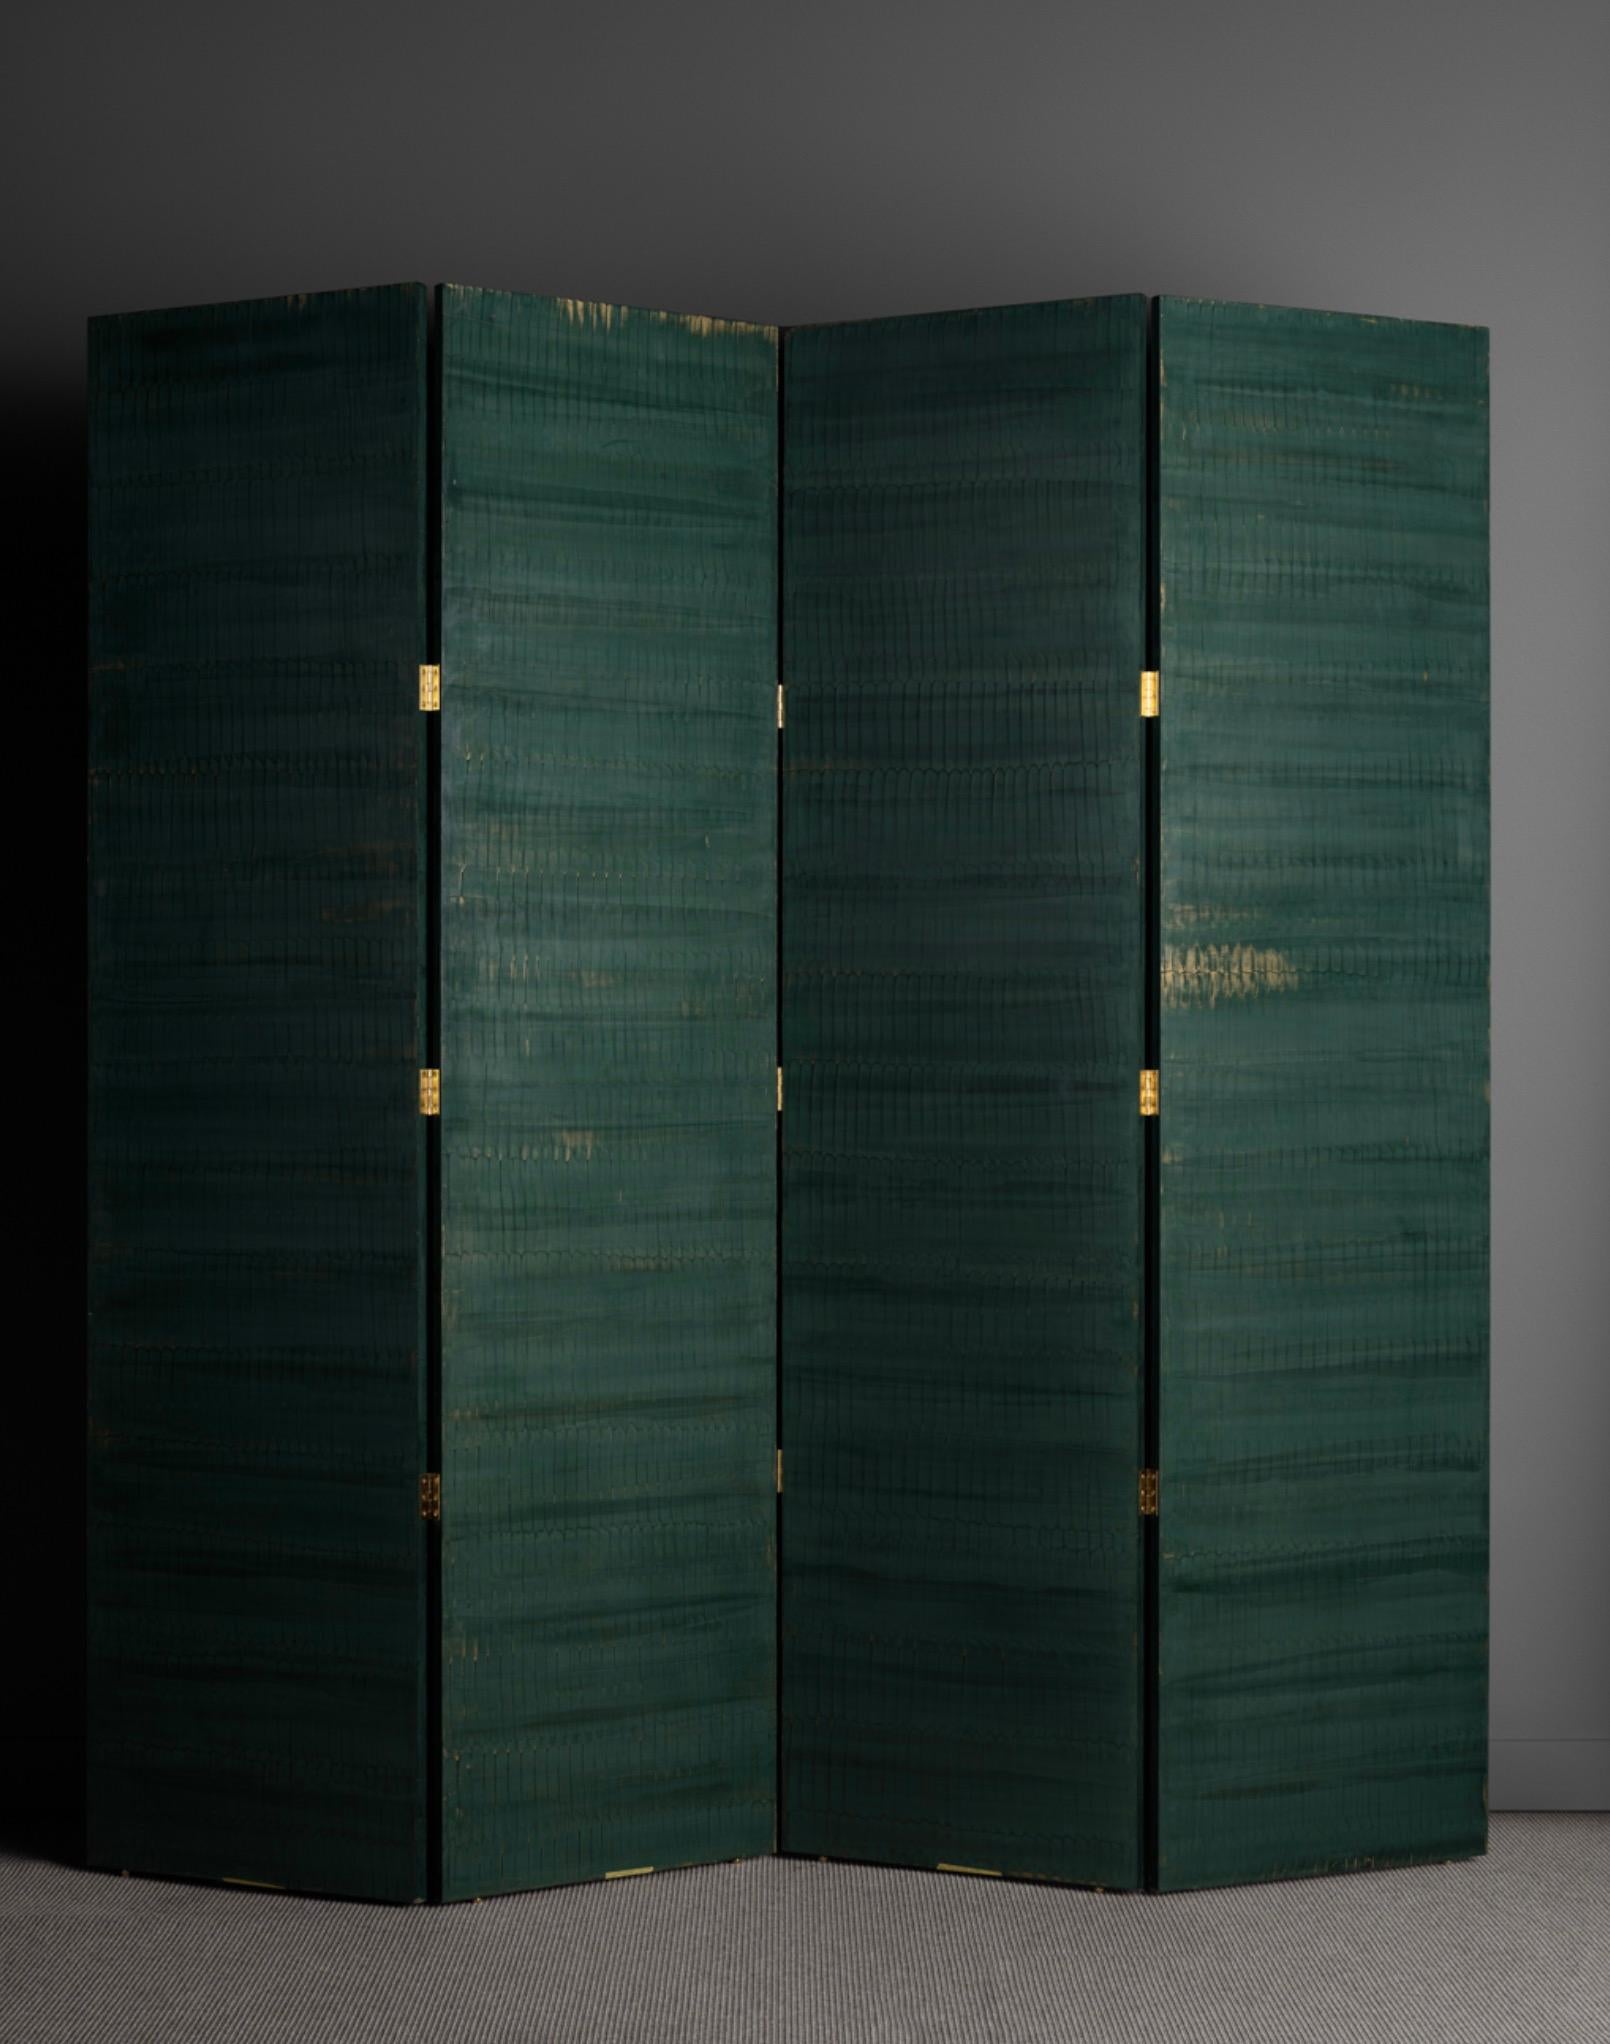 Yolande Milan Batteau (b. 1970)
USA, 2022
Four panel screen made of wood, marble dust plaster, Abalone, handmade glazes and micaceous waxes.